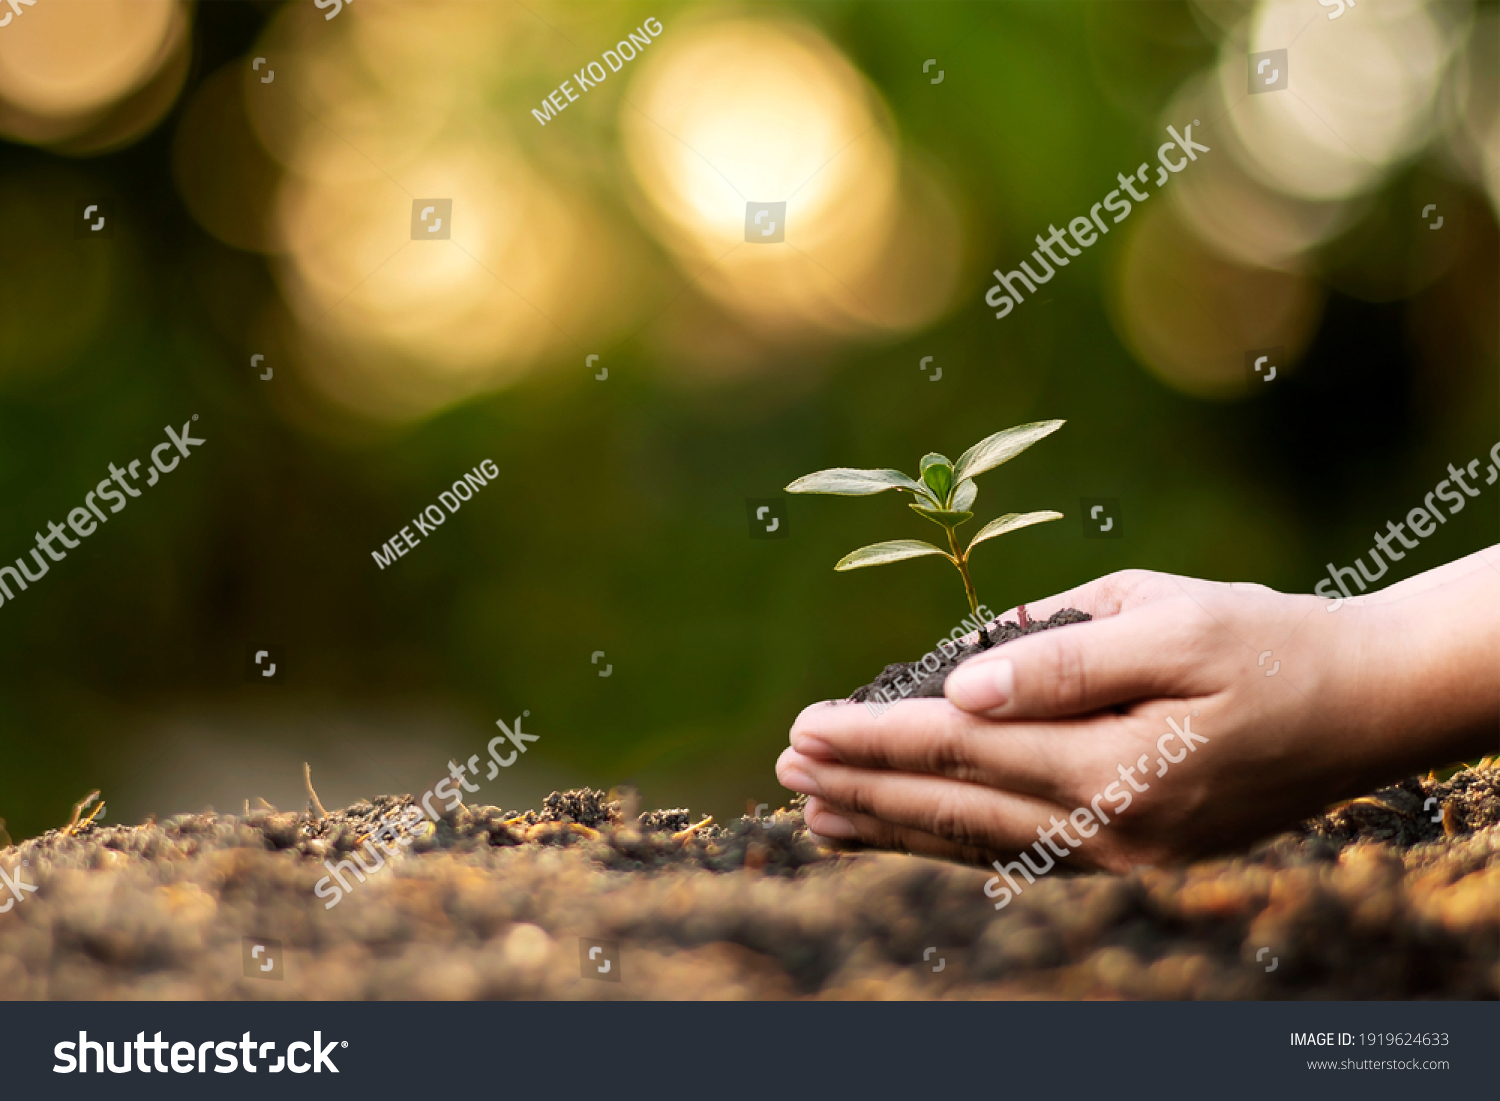 Human hands planting seedlings or trees in the soil Earth Day and global warming campaign. #1919624633